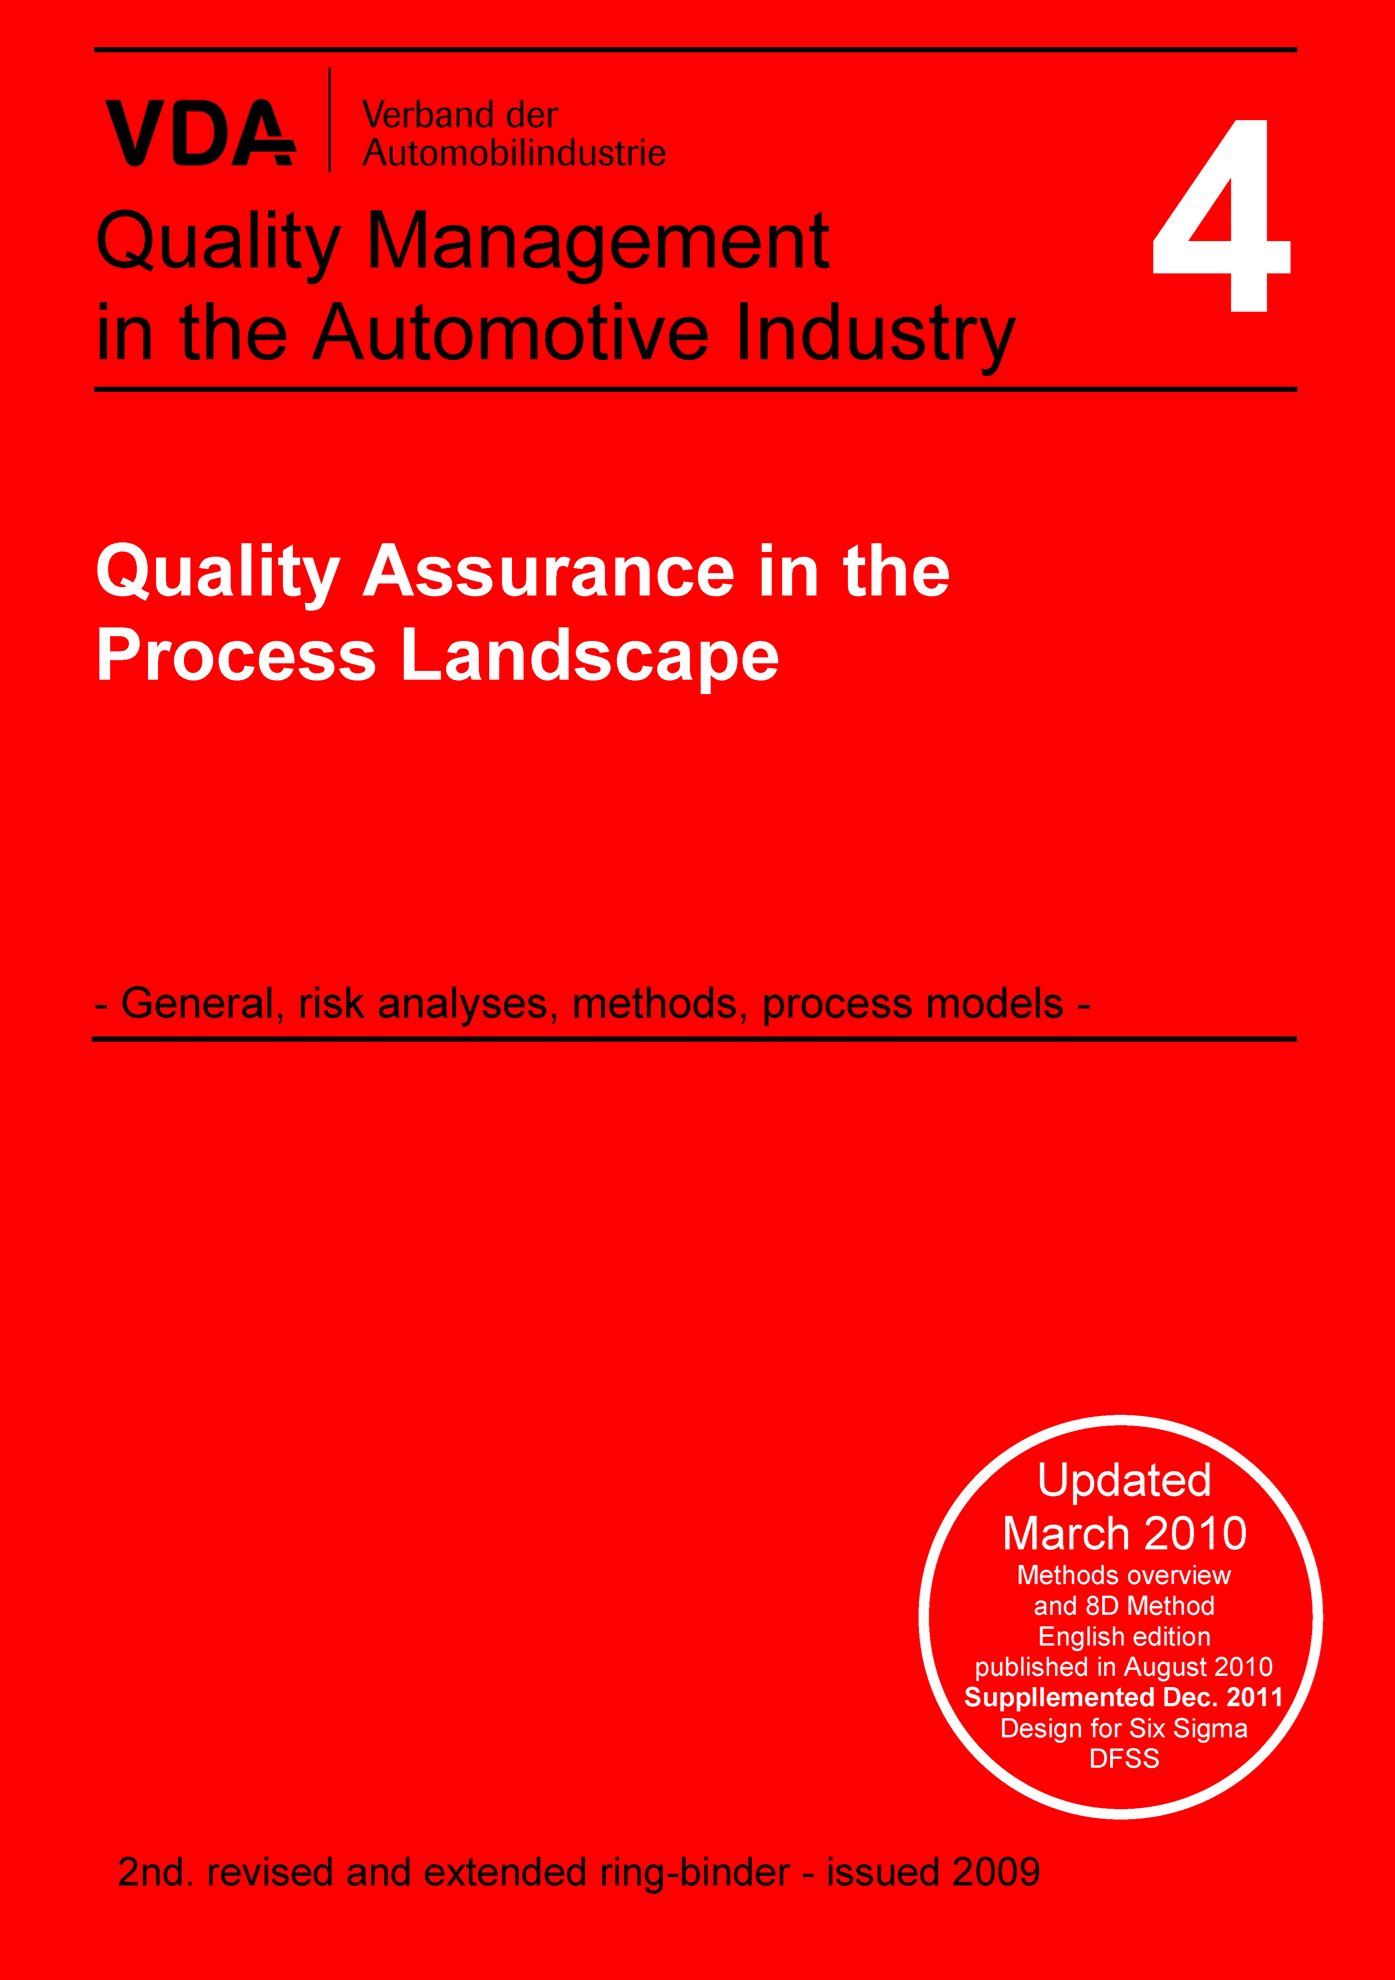 VDA Volume 4 Ring-binder, Quality Assurance in the Process Landscape, 2nd revised and extended edition 2009, up-dated March 2010, supplemented in December 2011 1.1.2011